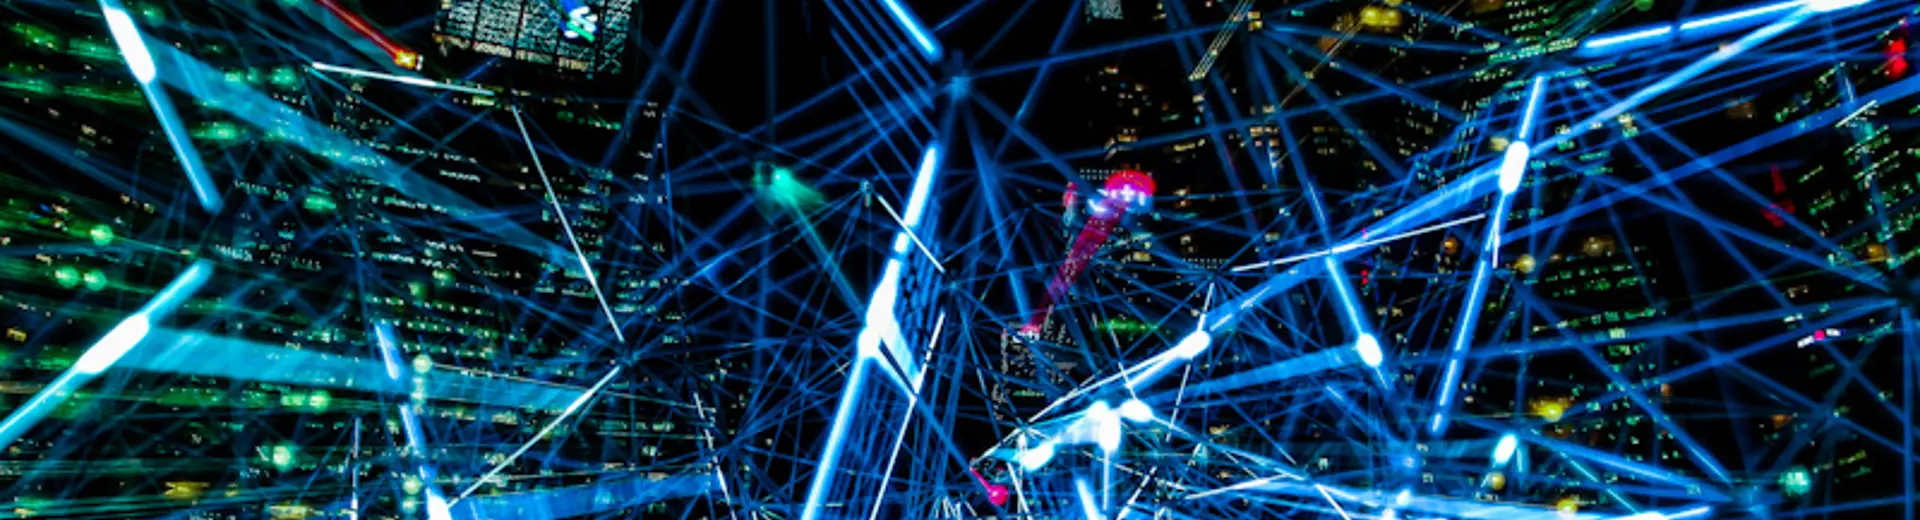 Network of lasers in front of a city scape